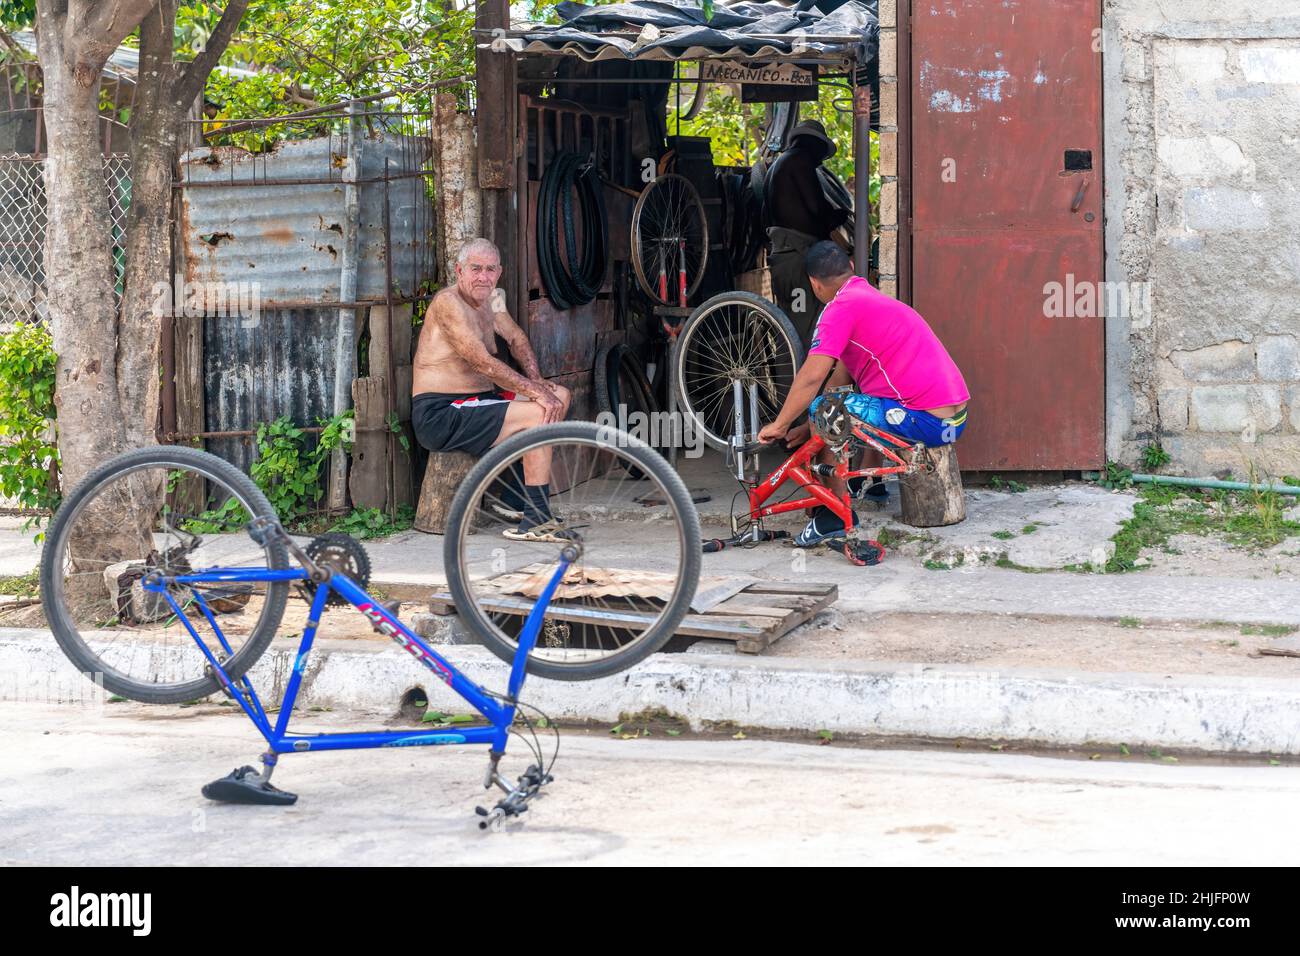 A bicycle repair shop in the La Vigia neighborhood. Two men sit at the door of the run-down building. Stock Photo